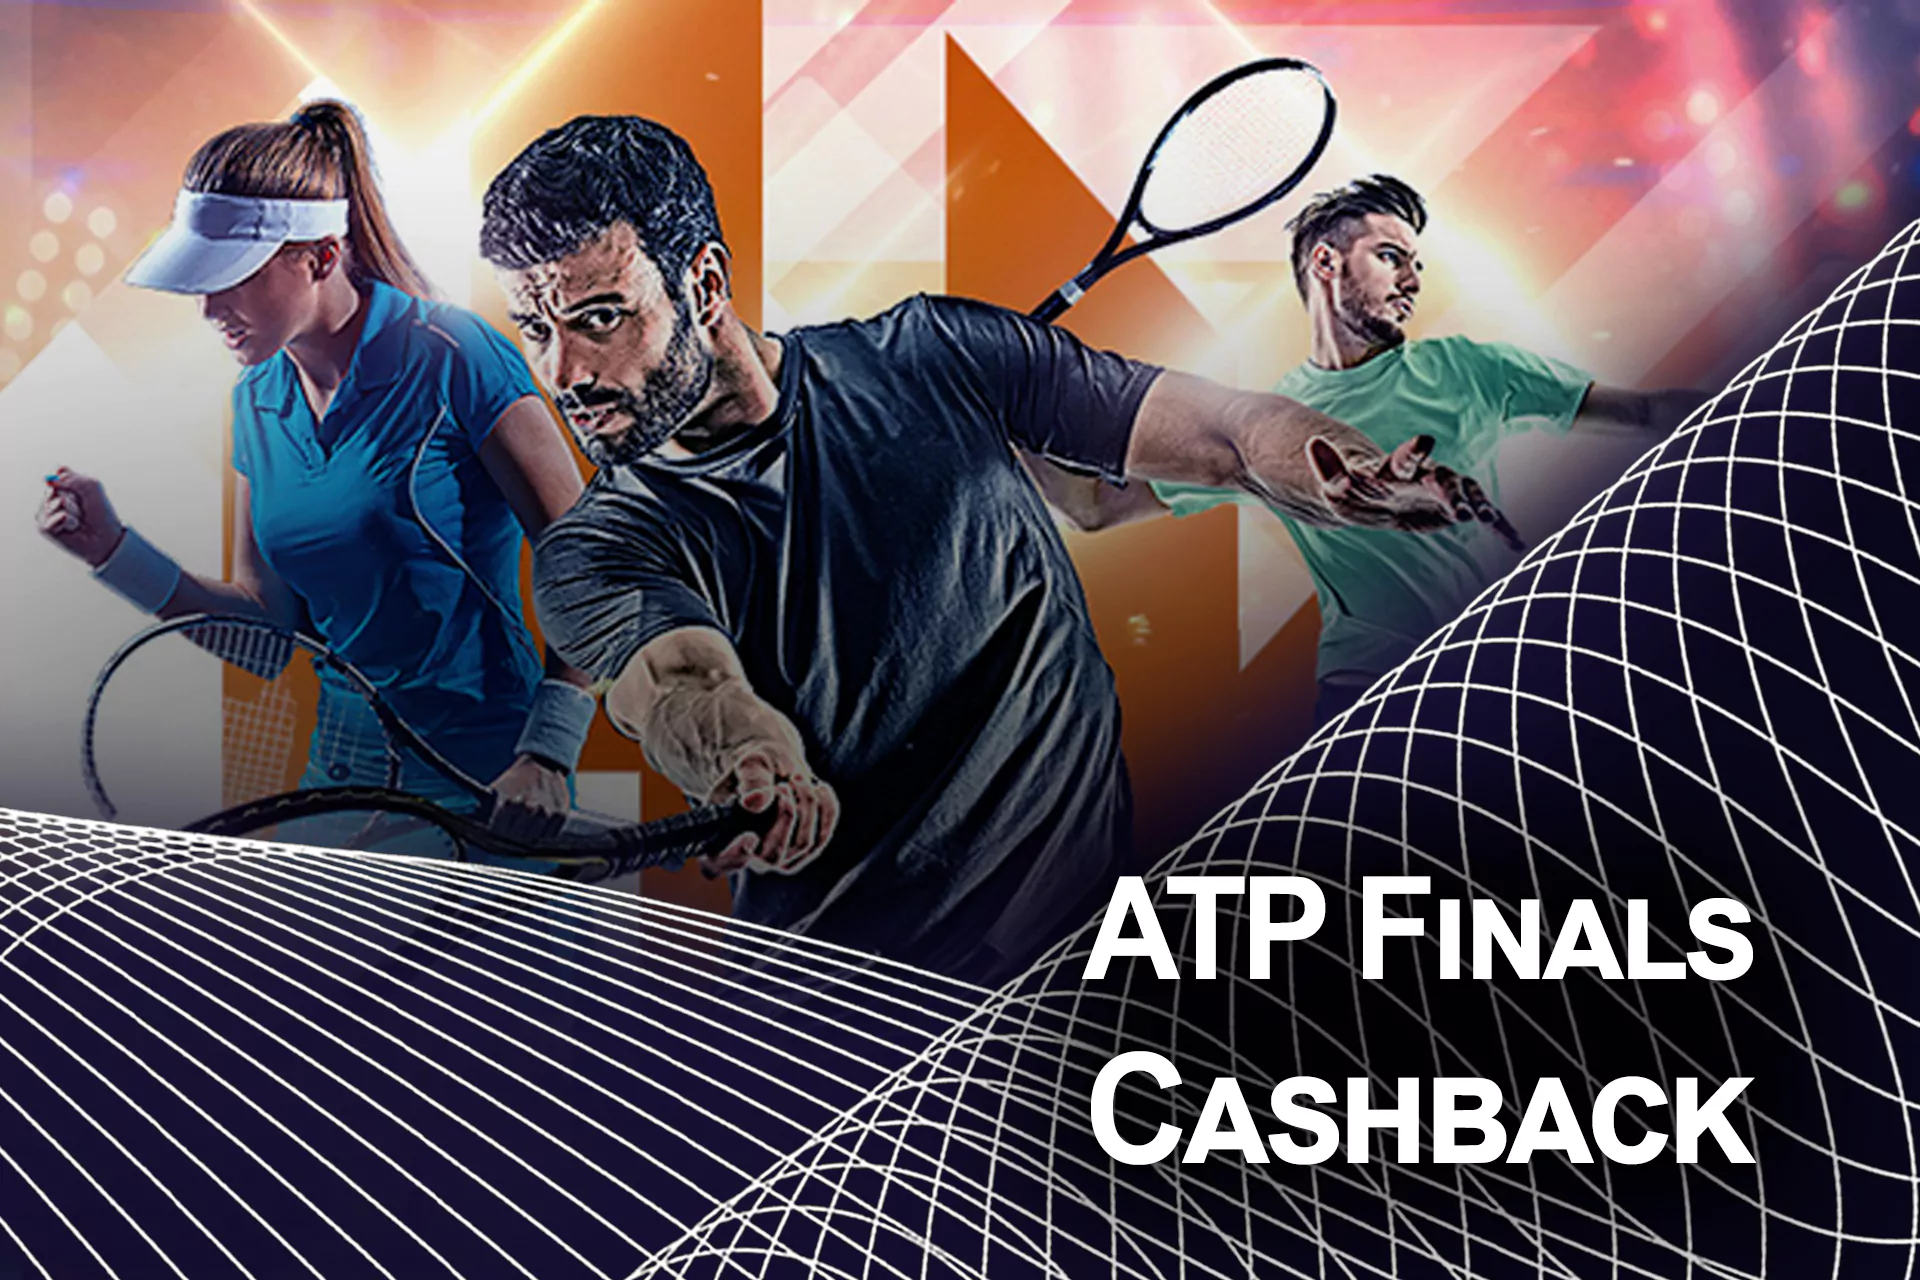 If you usually place bets on the tennis championships, don't miss the ATP Finals Cashback.